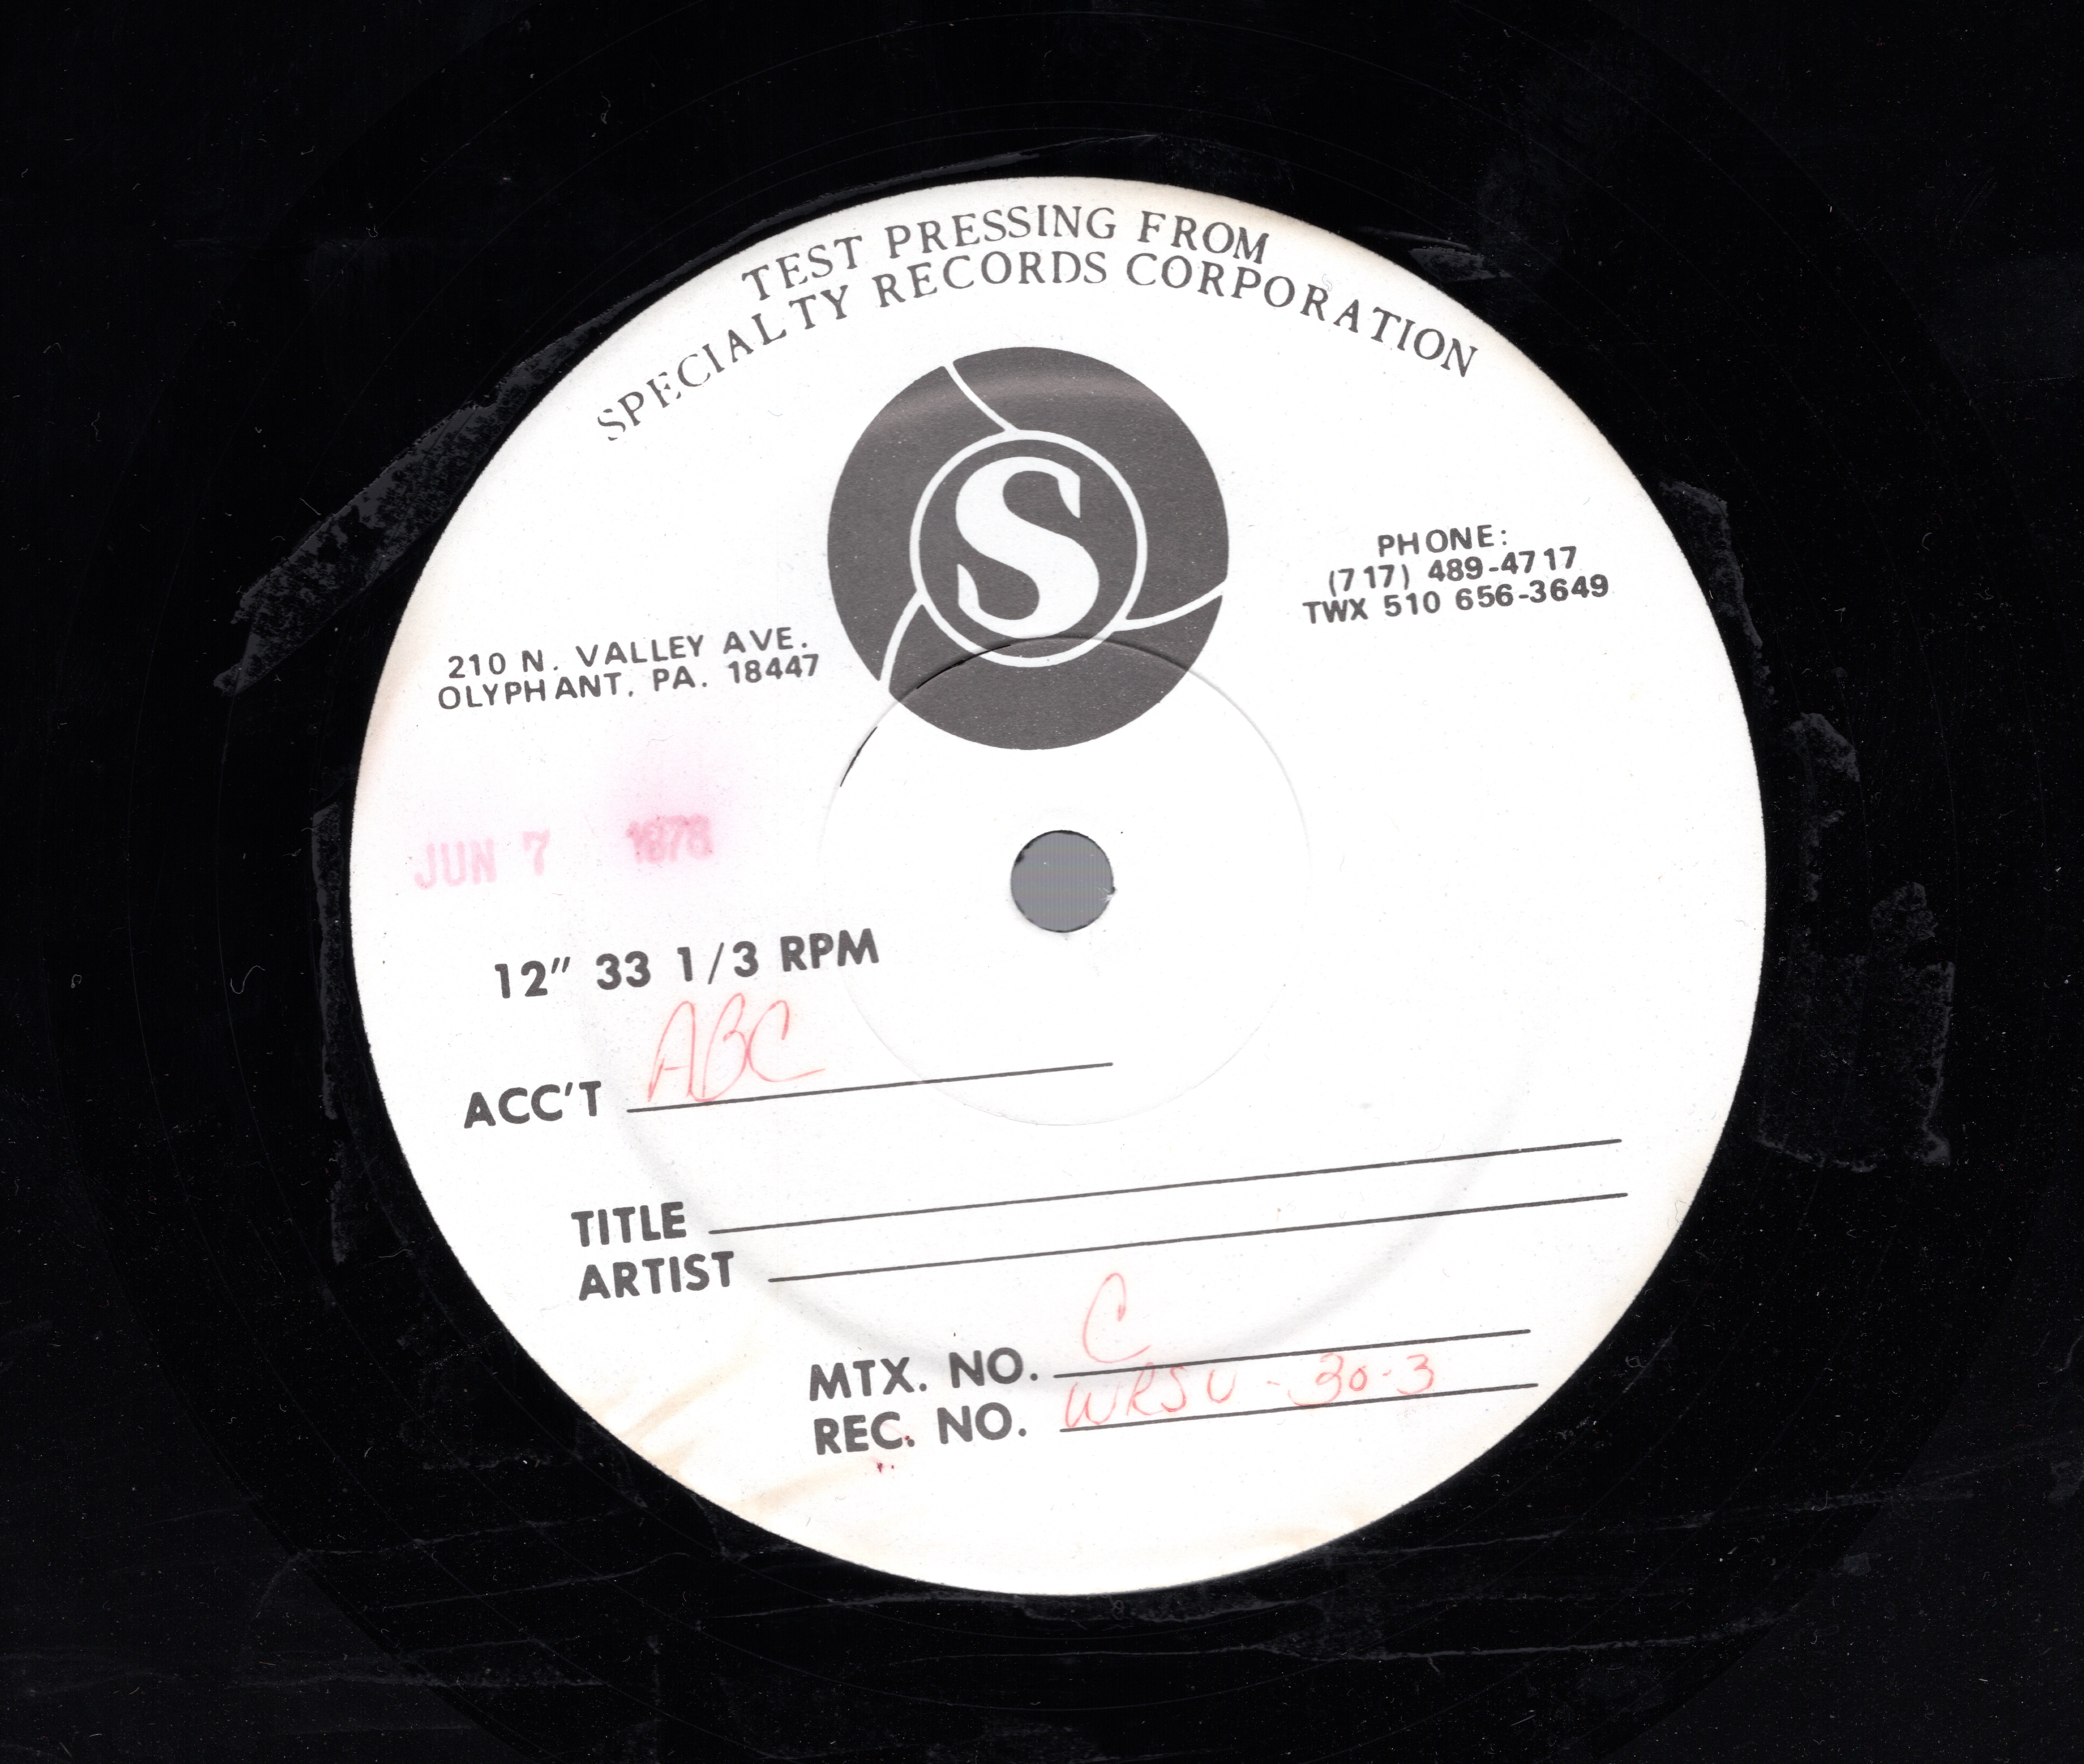 30 Years on the Banks Jacket Cover - Printed by ABC Records - Test Pressing of the Record